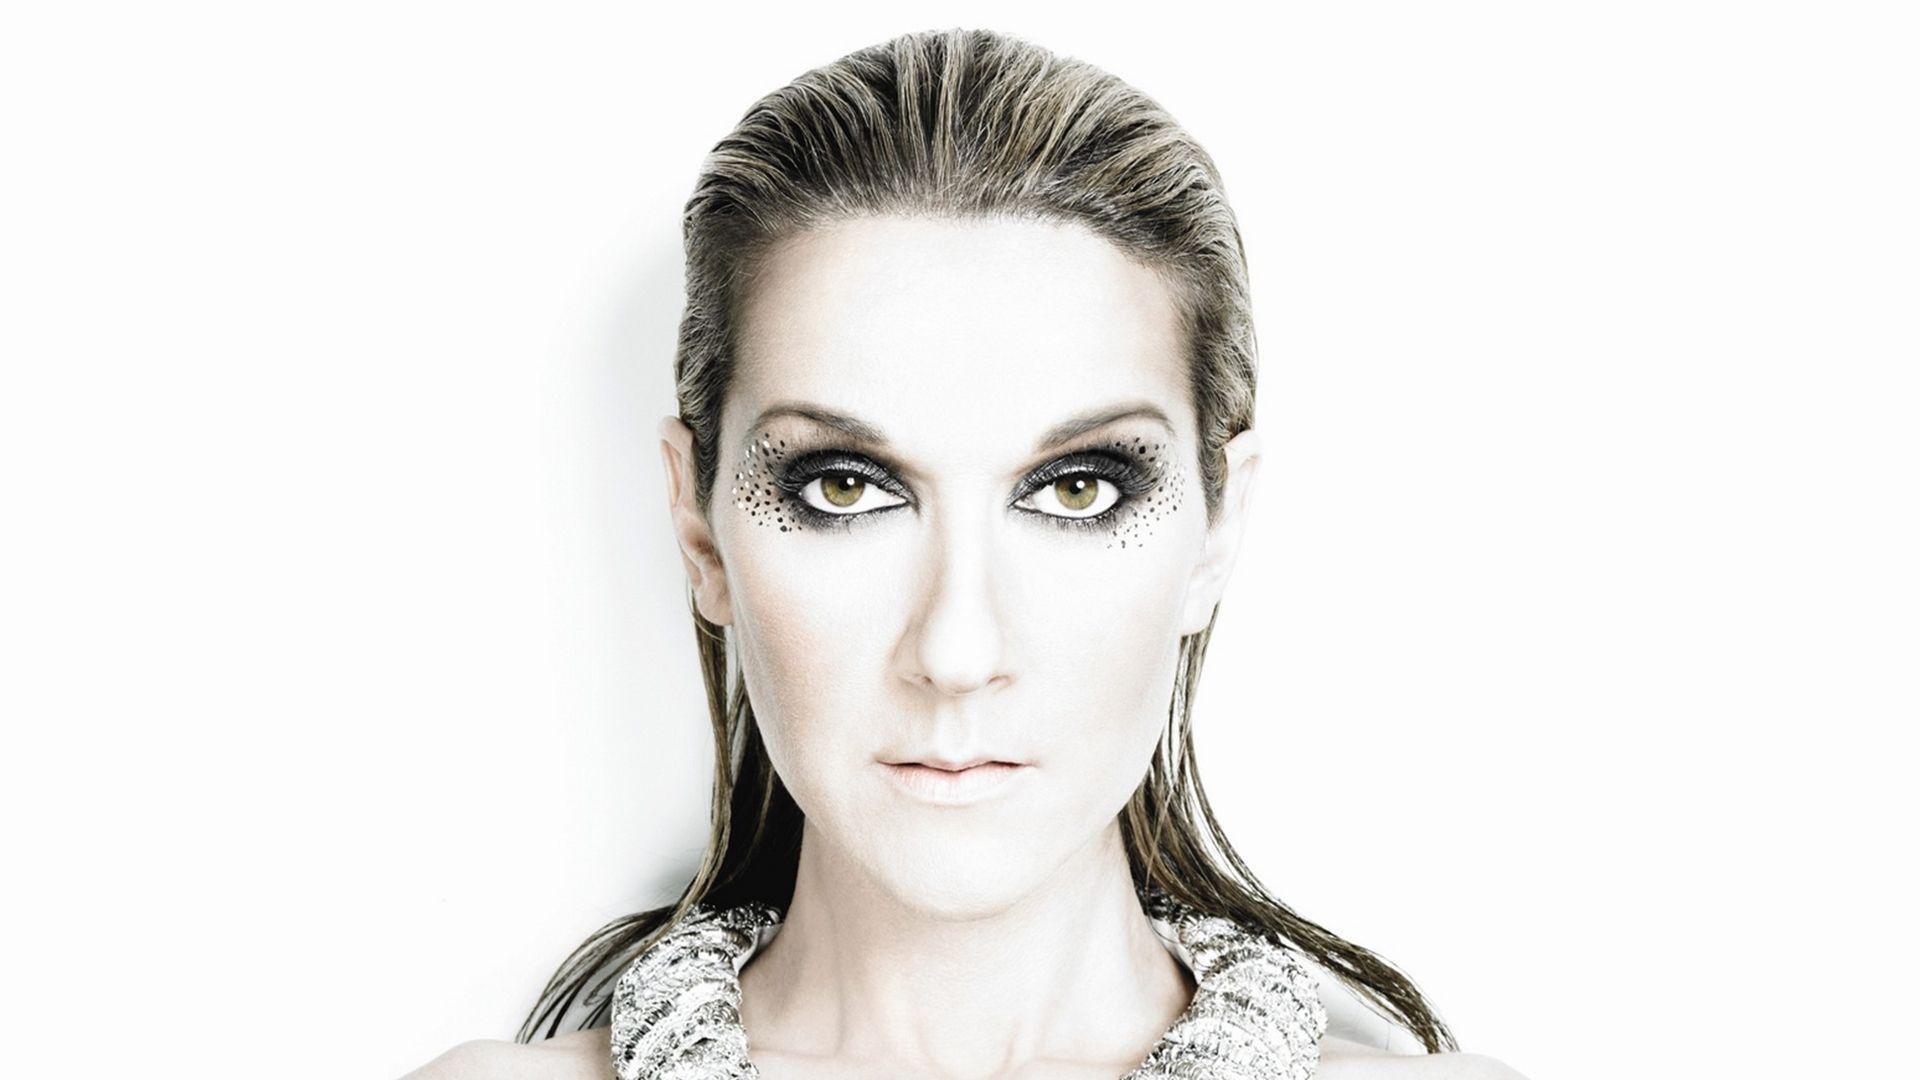 Celine Dion Wallpaper Image Photo Picture Background